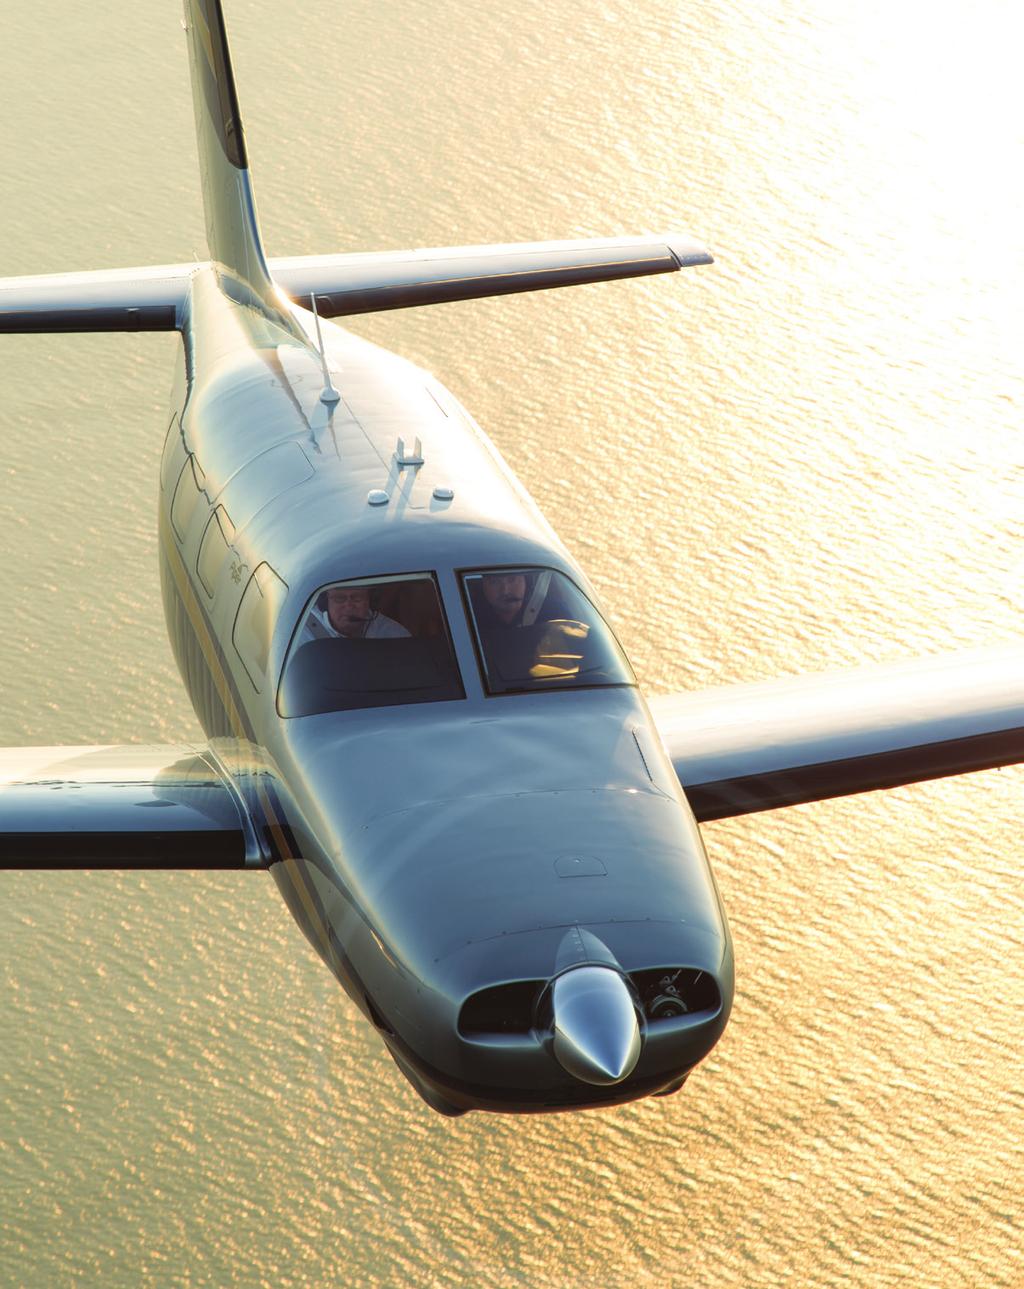 Piper Aircraft, Inc. reserves the right to make changes, including, but not limited to, changes in specifications, materials, equipment, and/or prices at any time without prior notice.